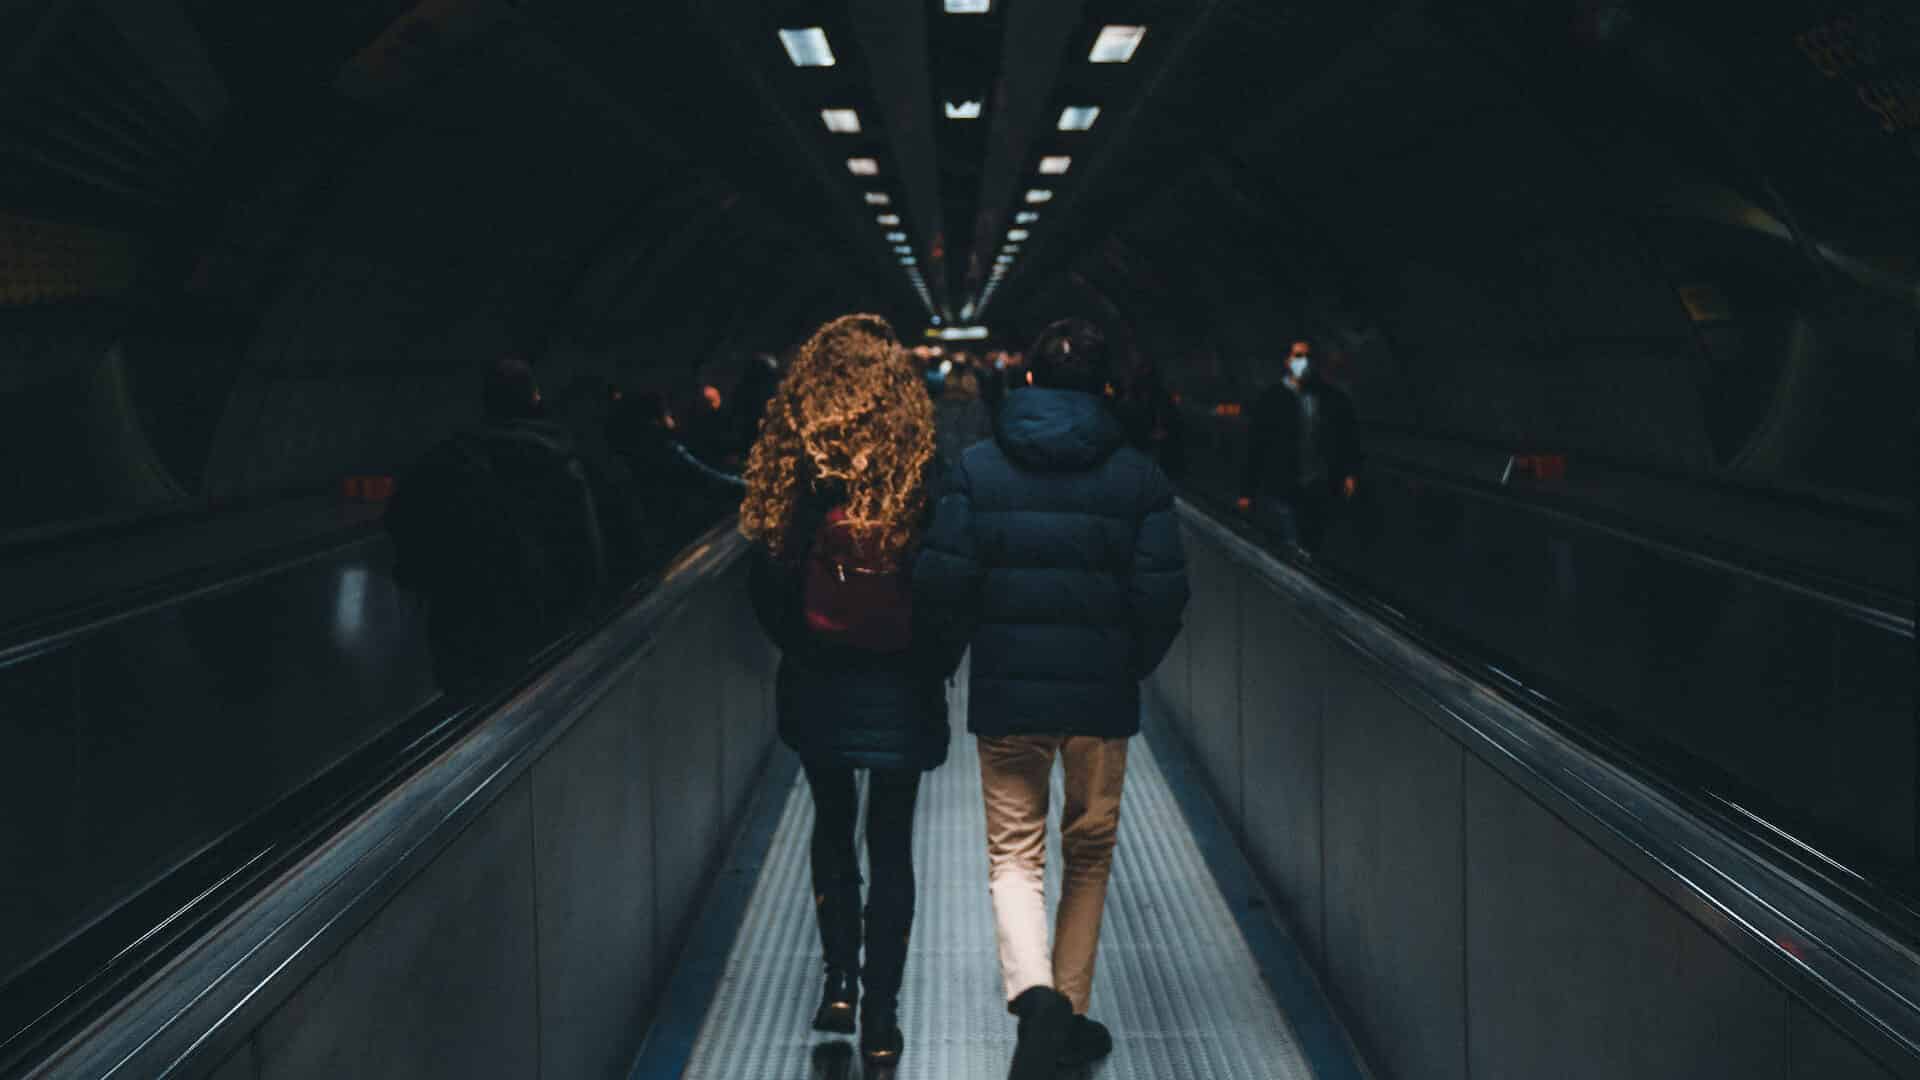 Two people seen from behind walking along an underground station tunnel